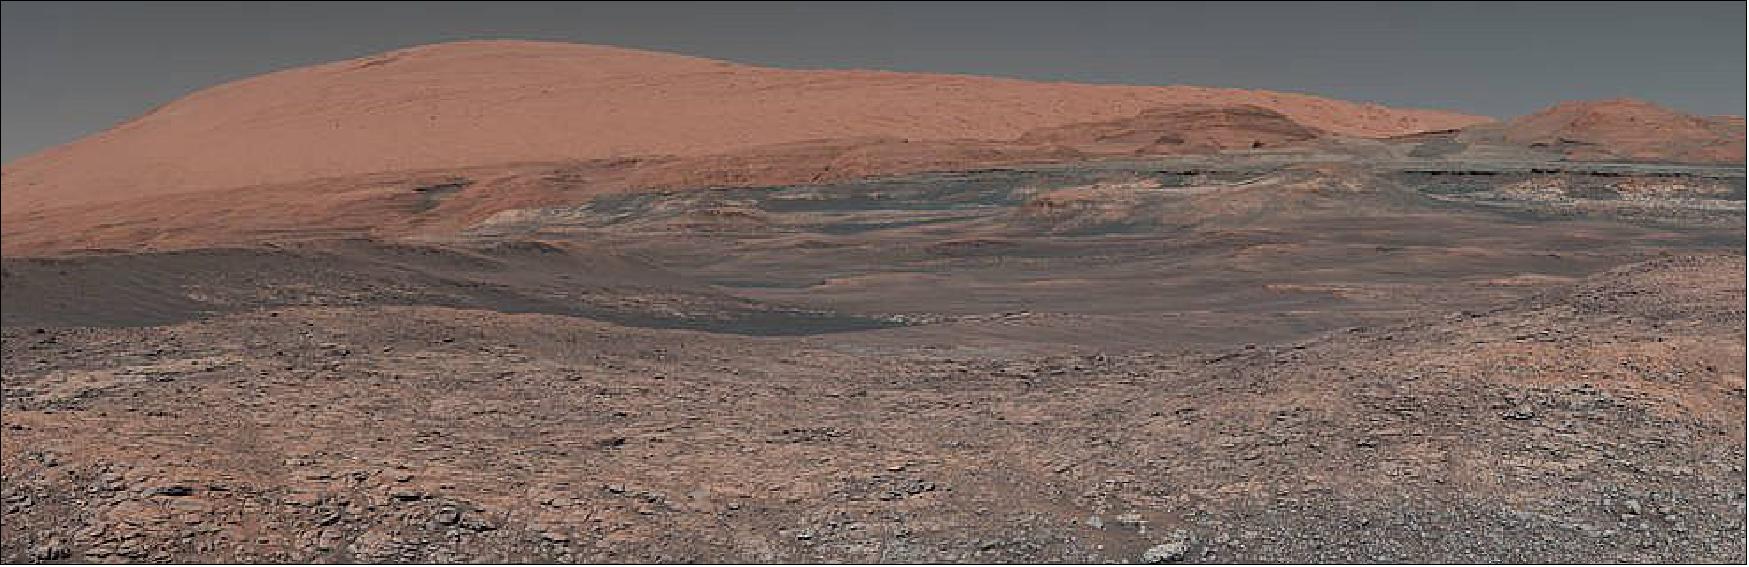 Figure 14: This mosaic was assembled in 2018 from dozens of images taken by the Mast Camera (Mastcam) on NASA's Curiosity rover. In the image, you're looking uphill at Mount Sharp, which is in the middle of Gale Crater on Mars. The scene has been white-balanced so the colors of the rock materials resemble how they would appear under daytime lighting conditions on Earth (image credit: NASA/JPL-Caltech/MSSS)